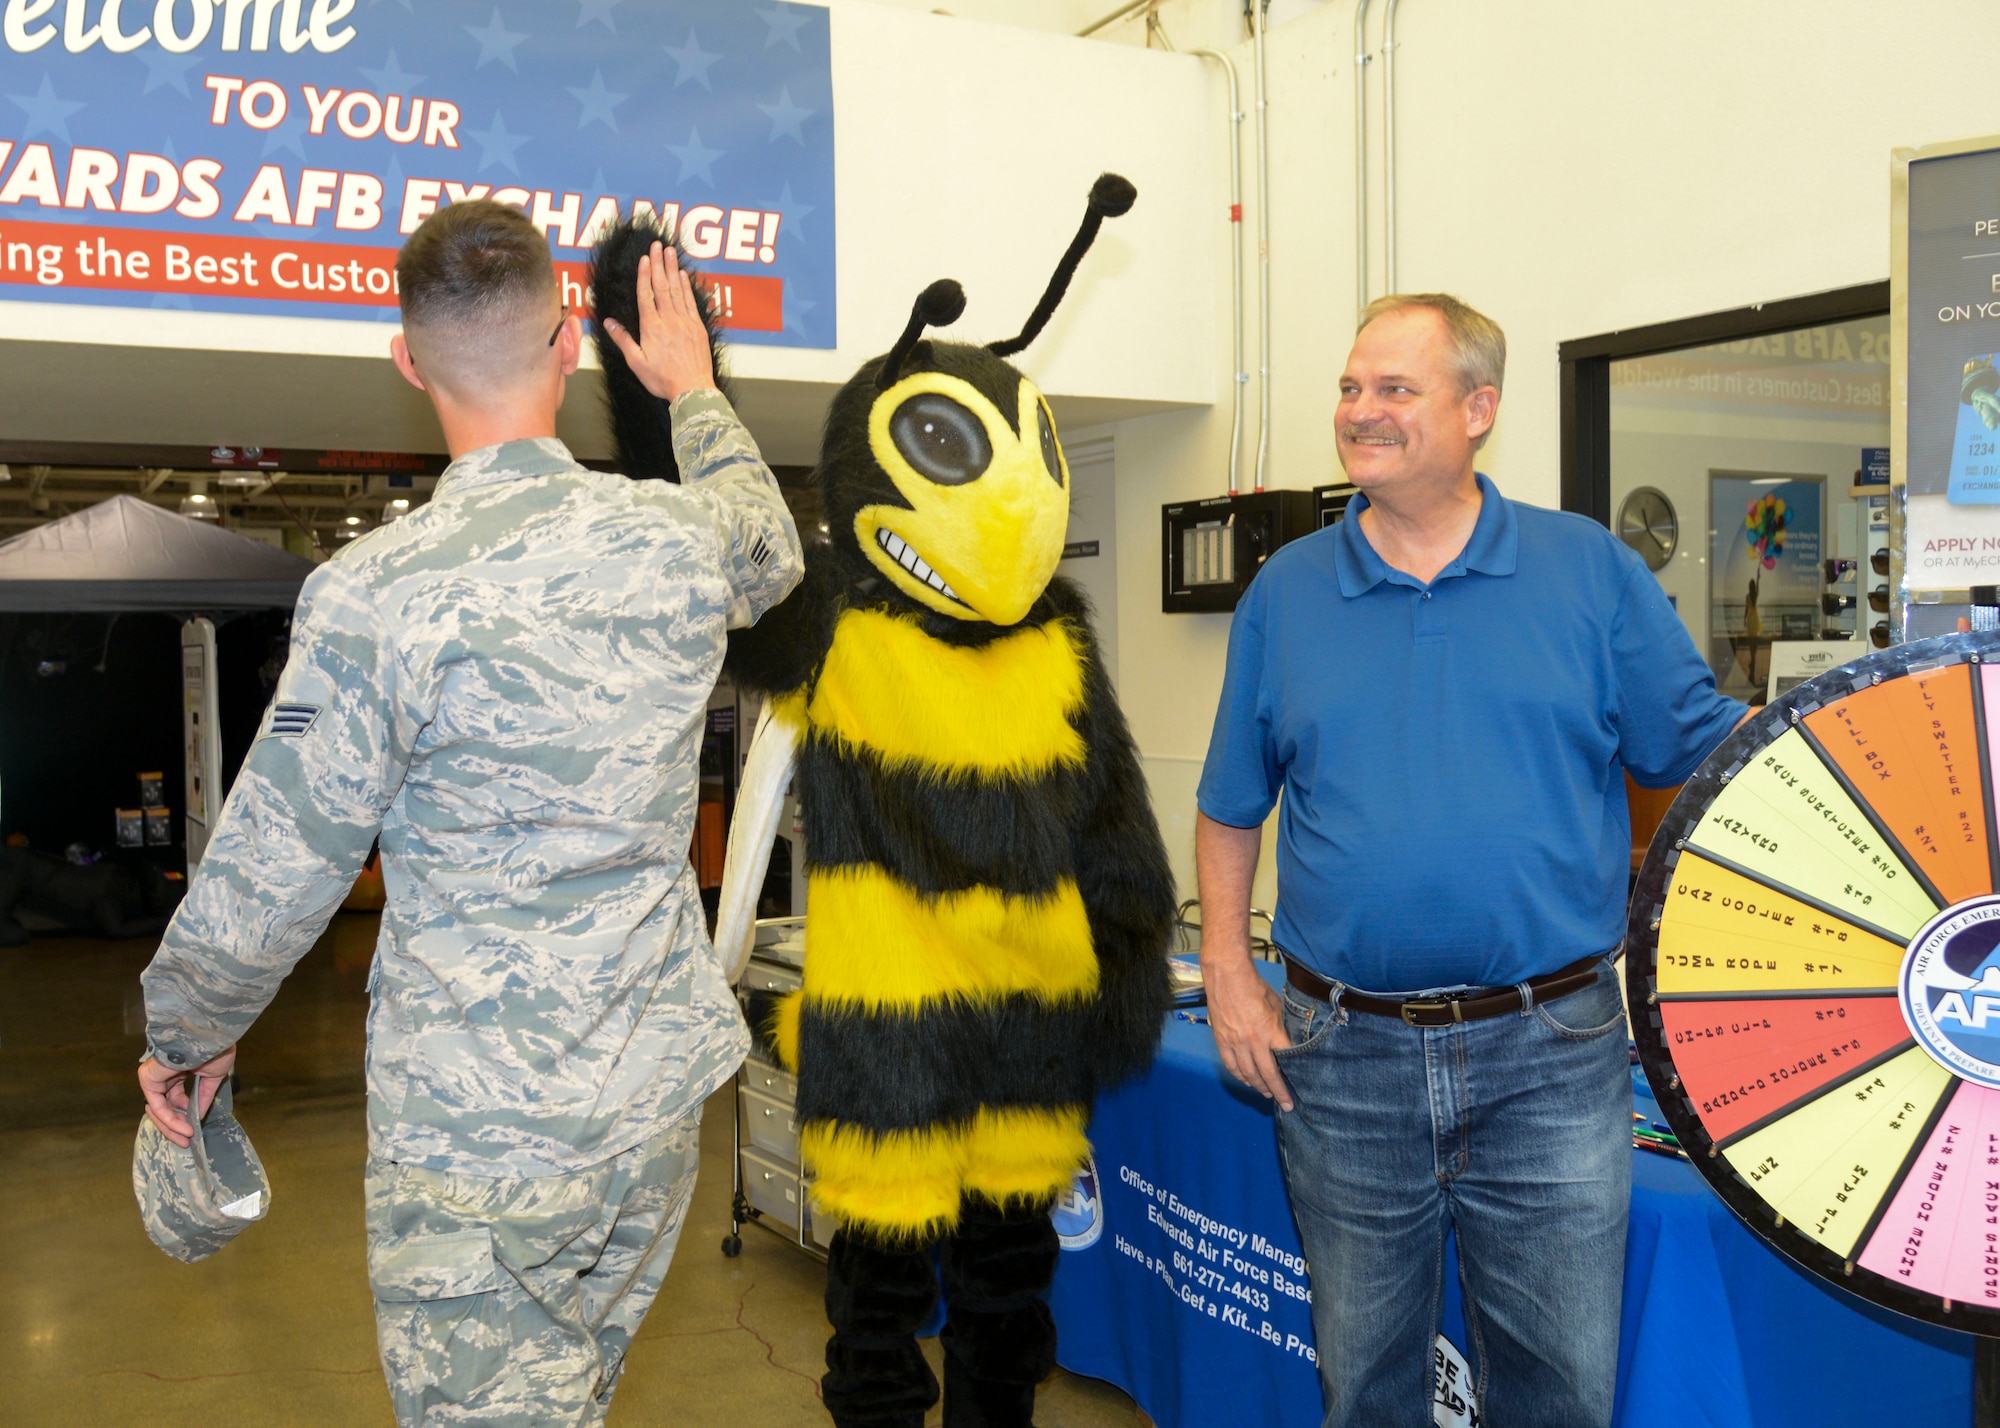 Eddie Bee Ready slaps fives with an Airmen at the Exchange along with Bill Hopper, 812th Civil Engineer Squadron Emergency Management Flight, Sept. 26, 2018. Members of Edwards Emergency Management have been at the Exchange throughout the month of September for National Preparedness Month. (U.S. Air Force photo by Giancarlo Casem)